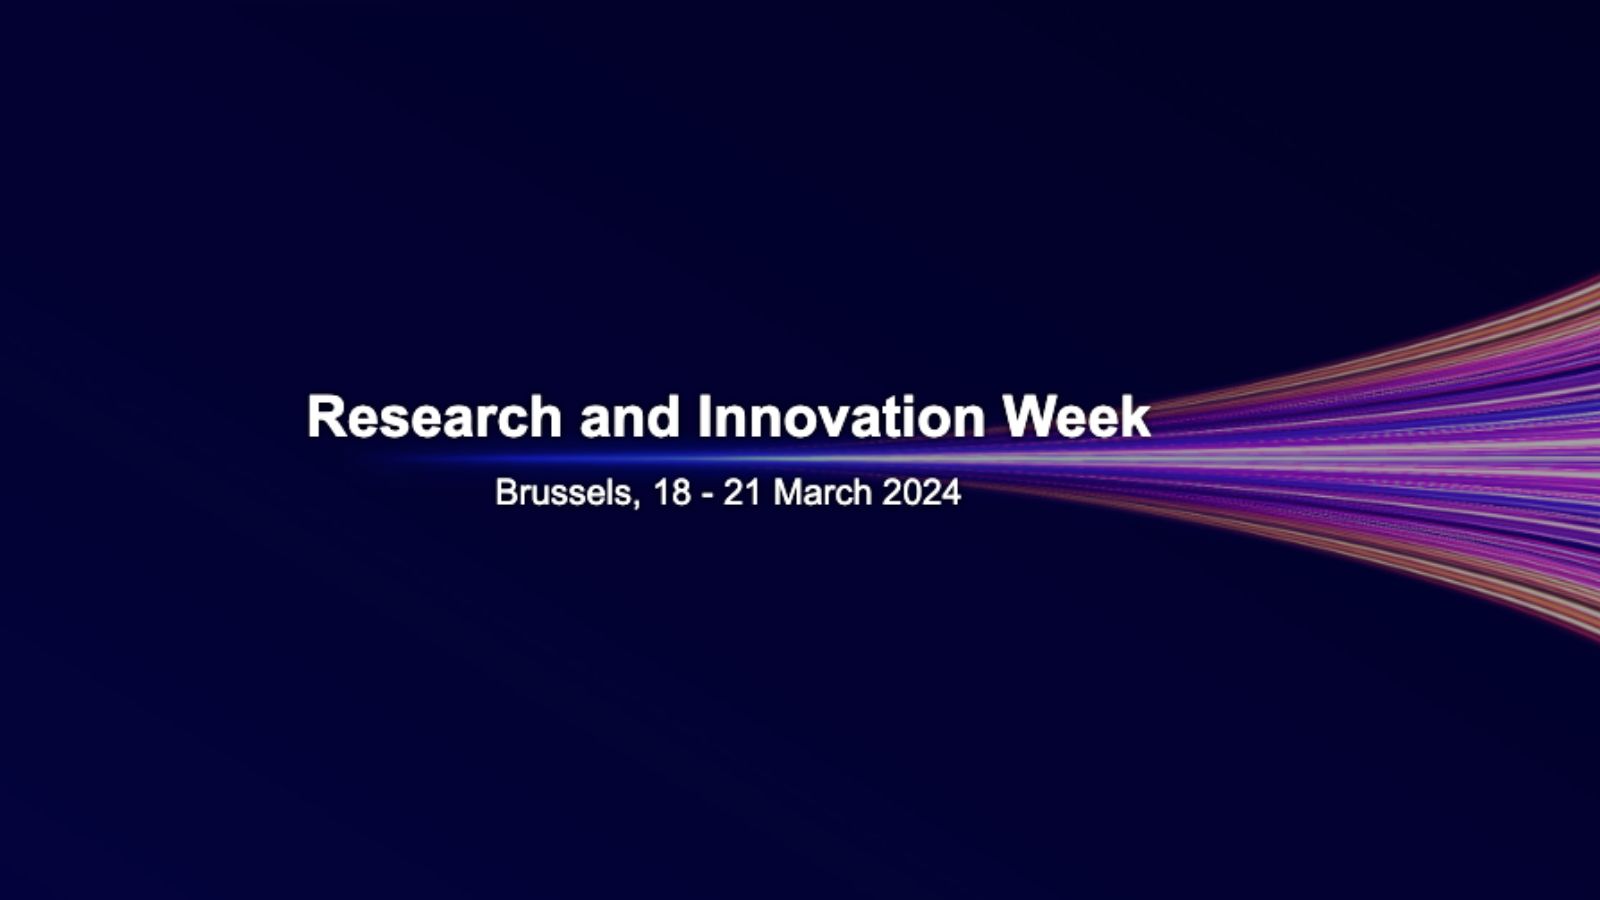 Watch out: Research & Innovation Week 2024 is coming!